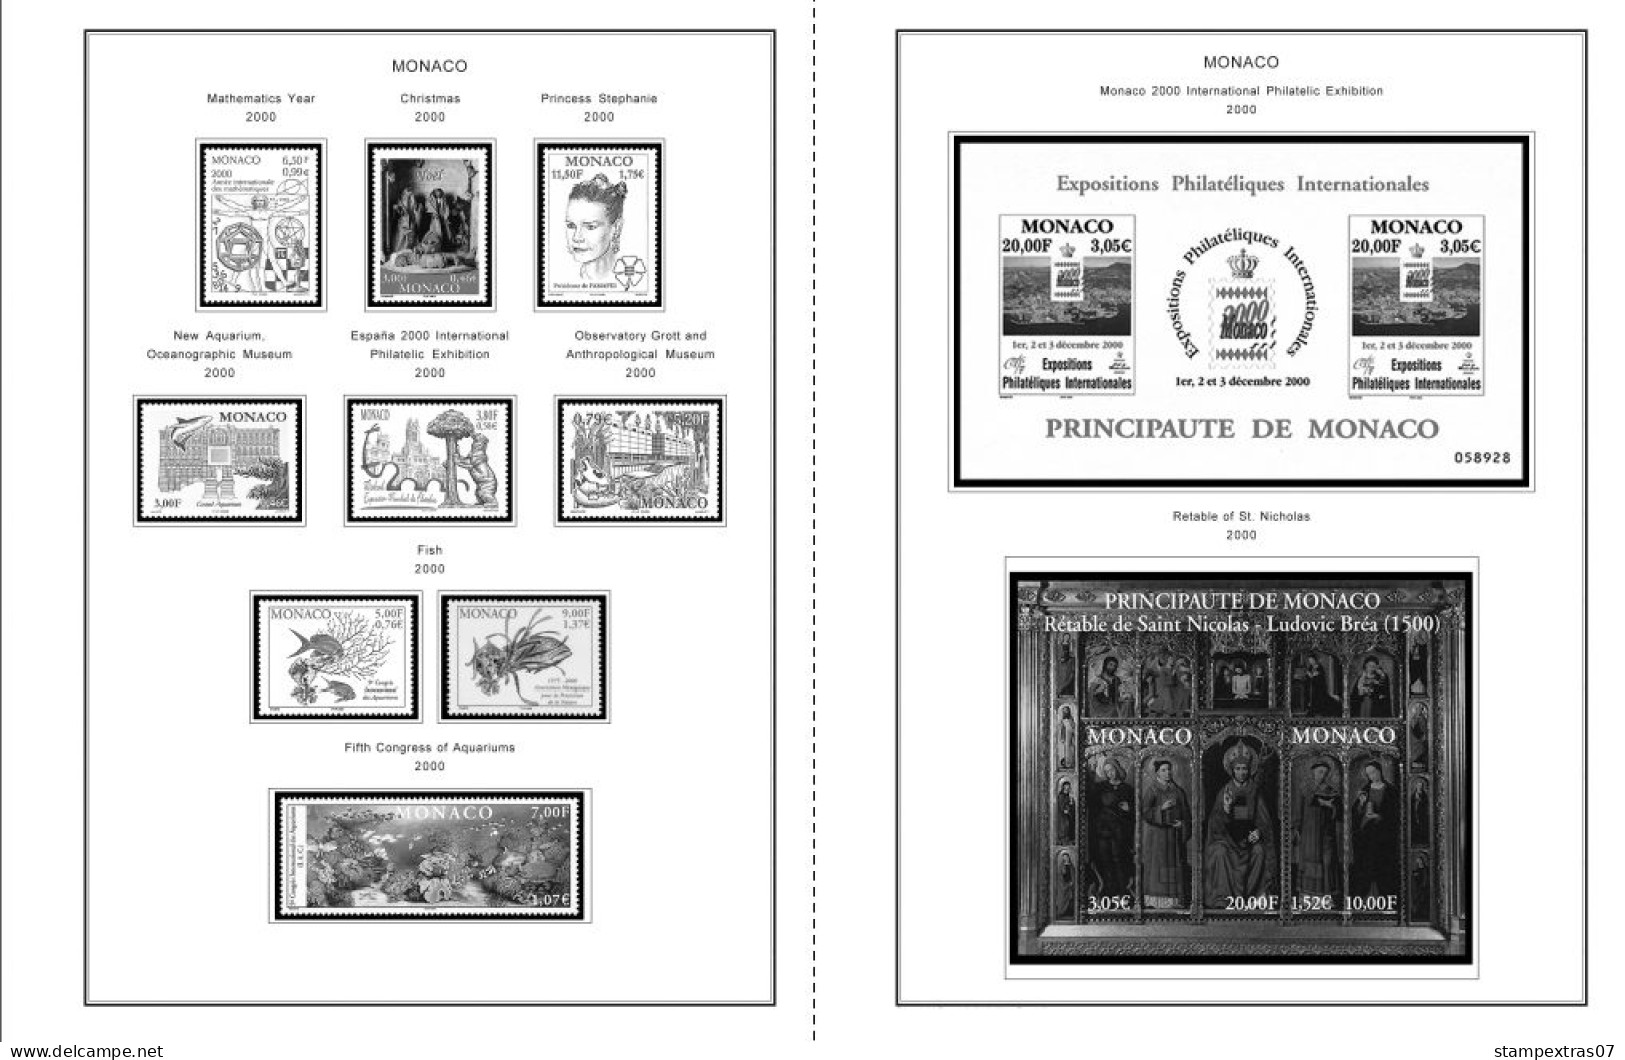 MONACO 1855-2010 + 2011-2020 STAMP ALBUM PAGES (409 B&w Illustrated Pages) - Englisch